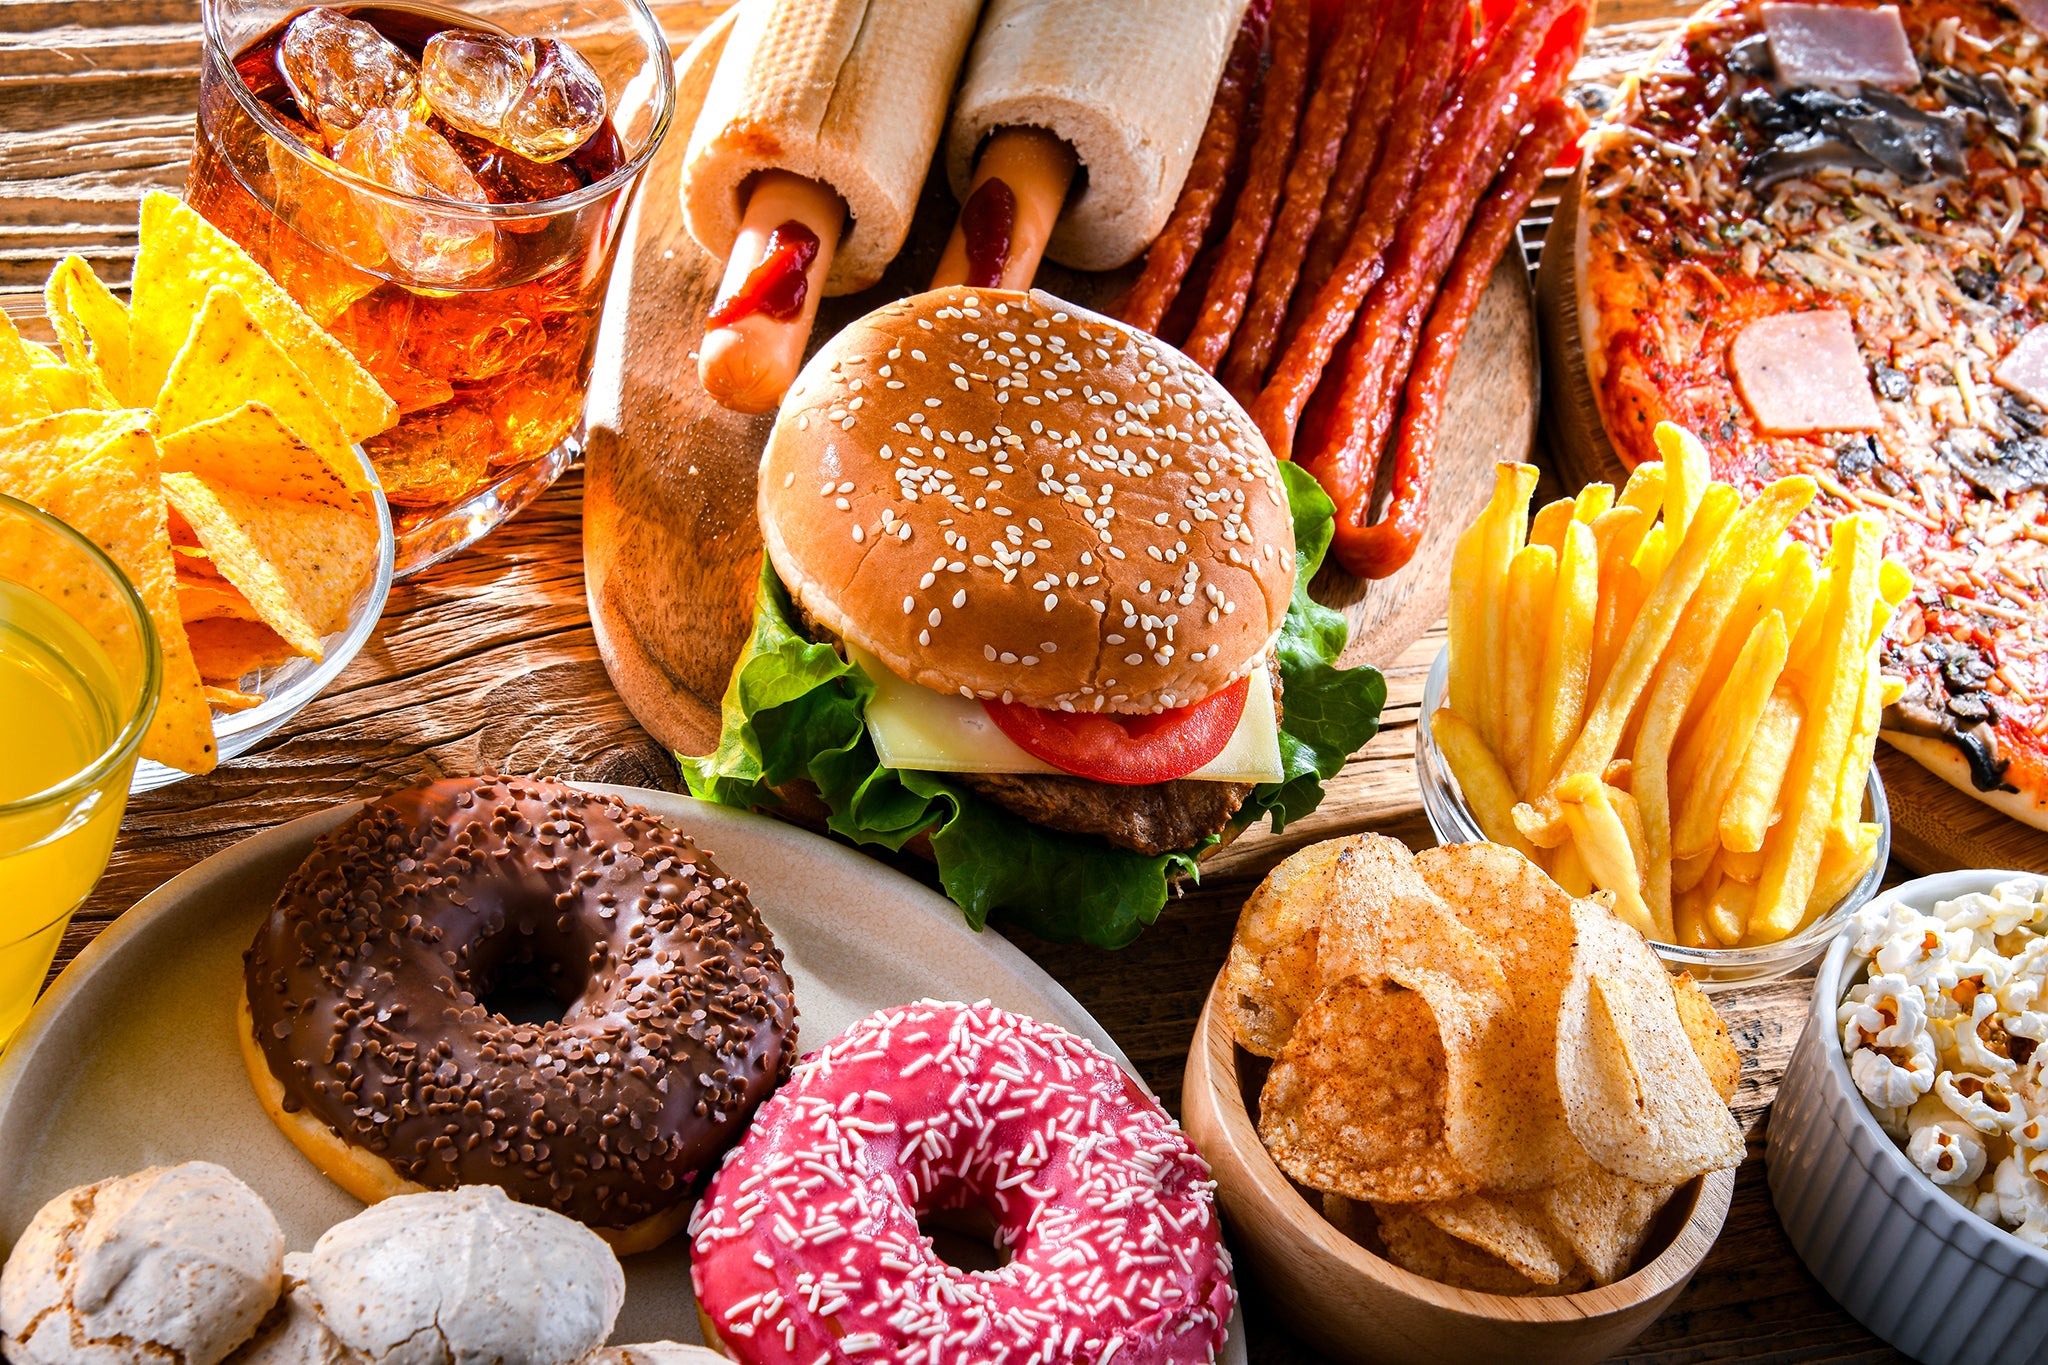 Ultra-processed foods often contain artificial colours, emulsifiers, flavours and other additives